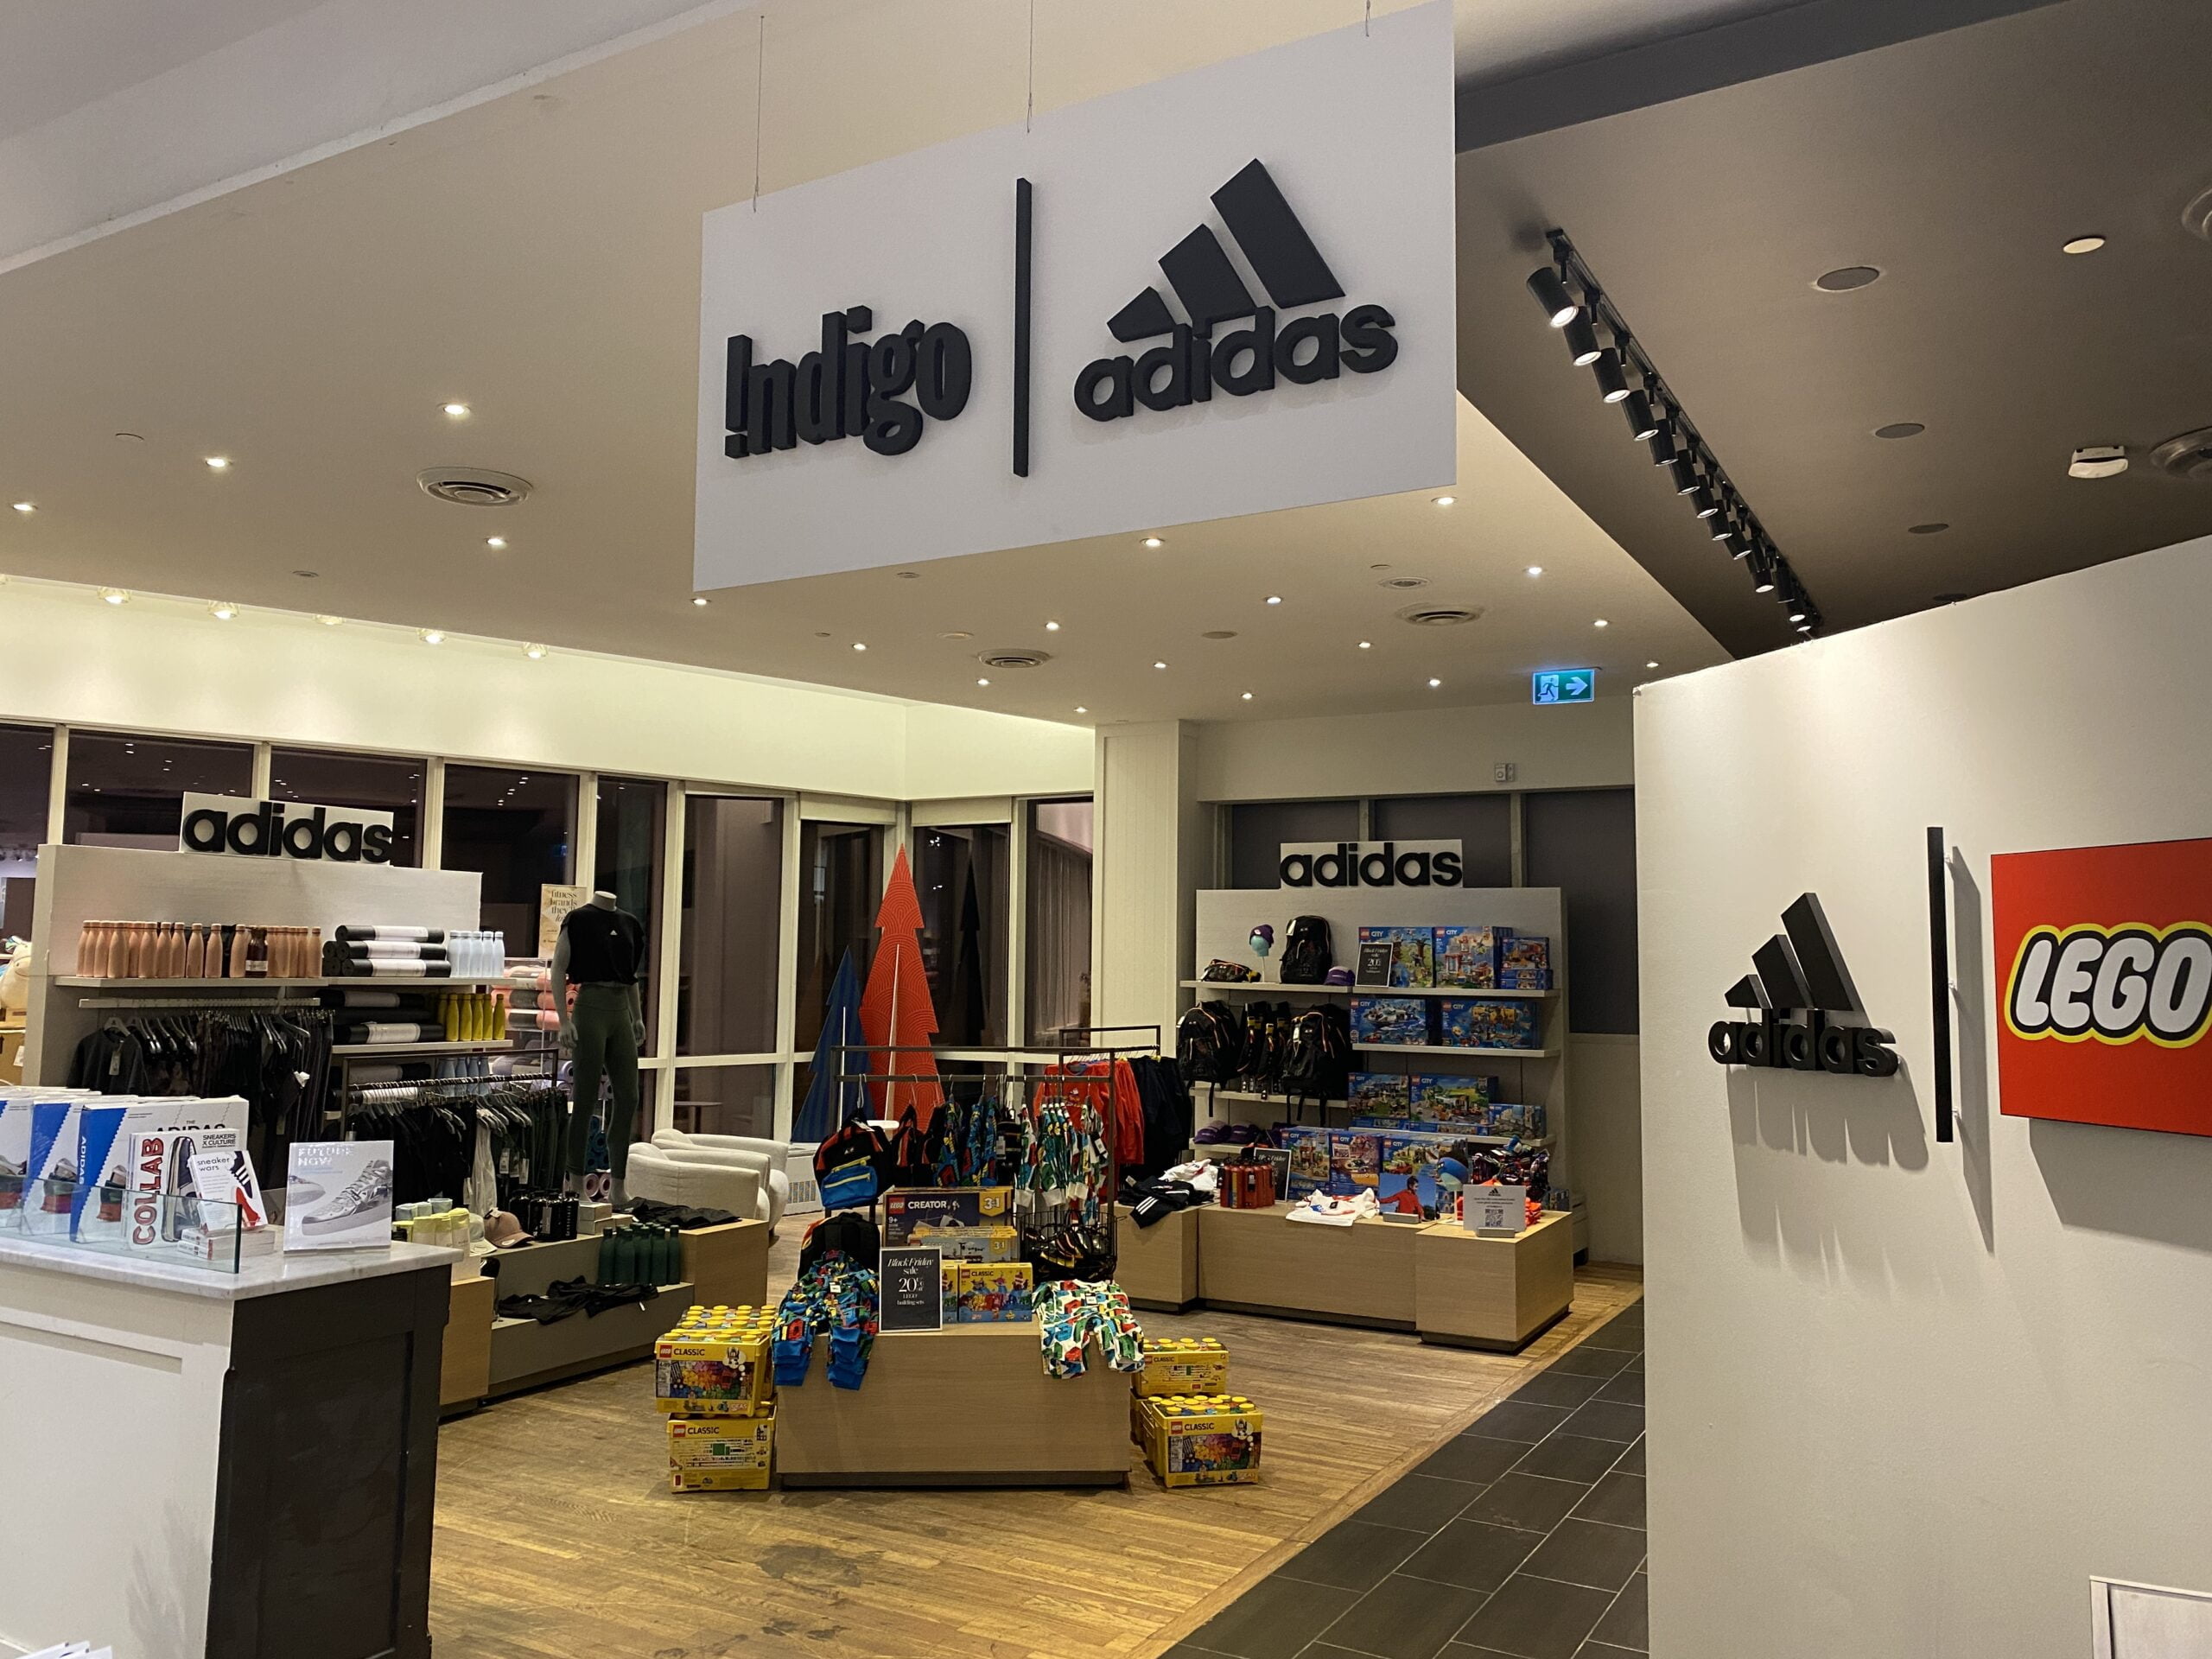 Tether straal Eerder Indigo Partners with adidas to Bring Apparel into Stores [Interview/Photos]